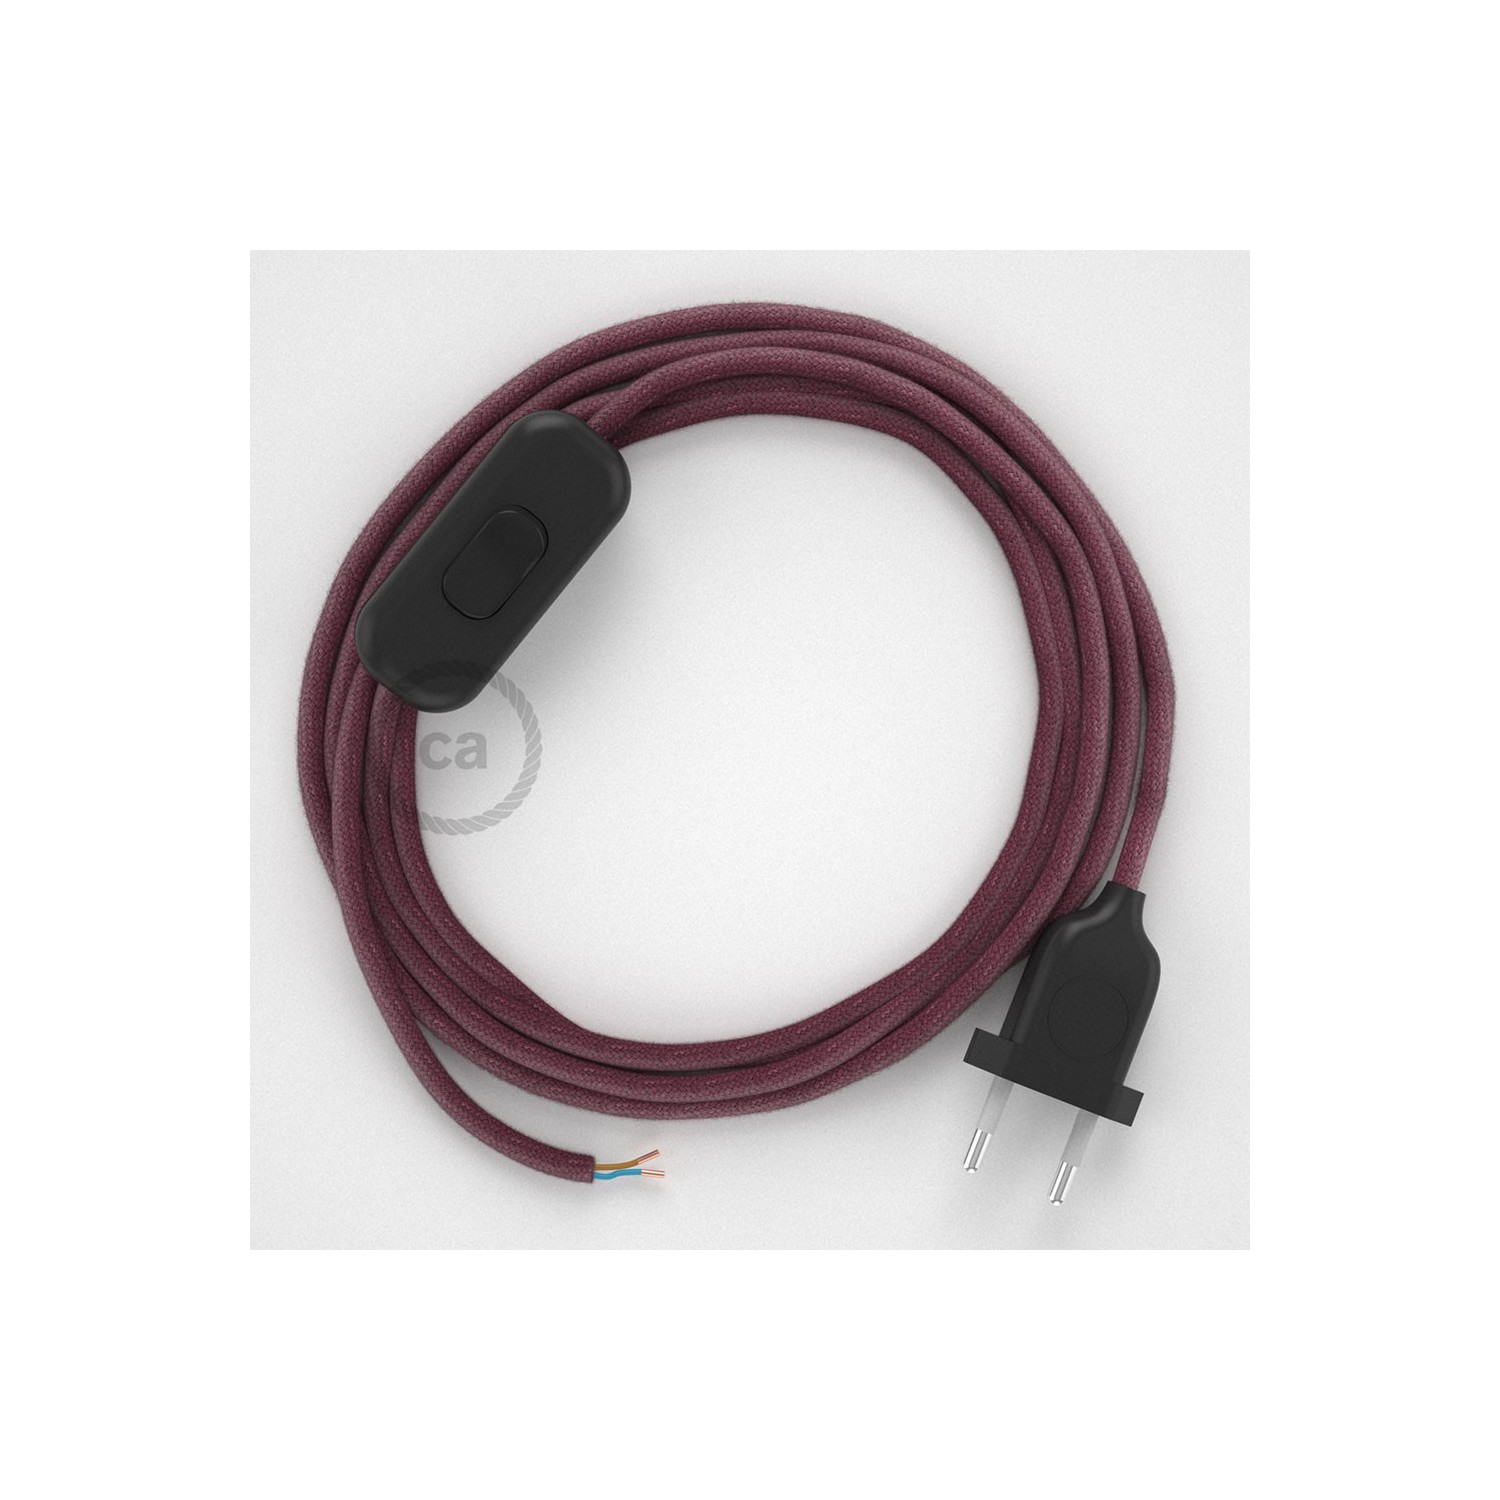 Lamp wiring, RC32 Burgundy Cotton 1,80 m. Choose the colour of the switch and plug.